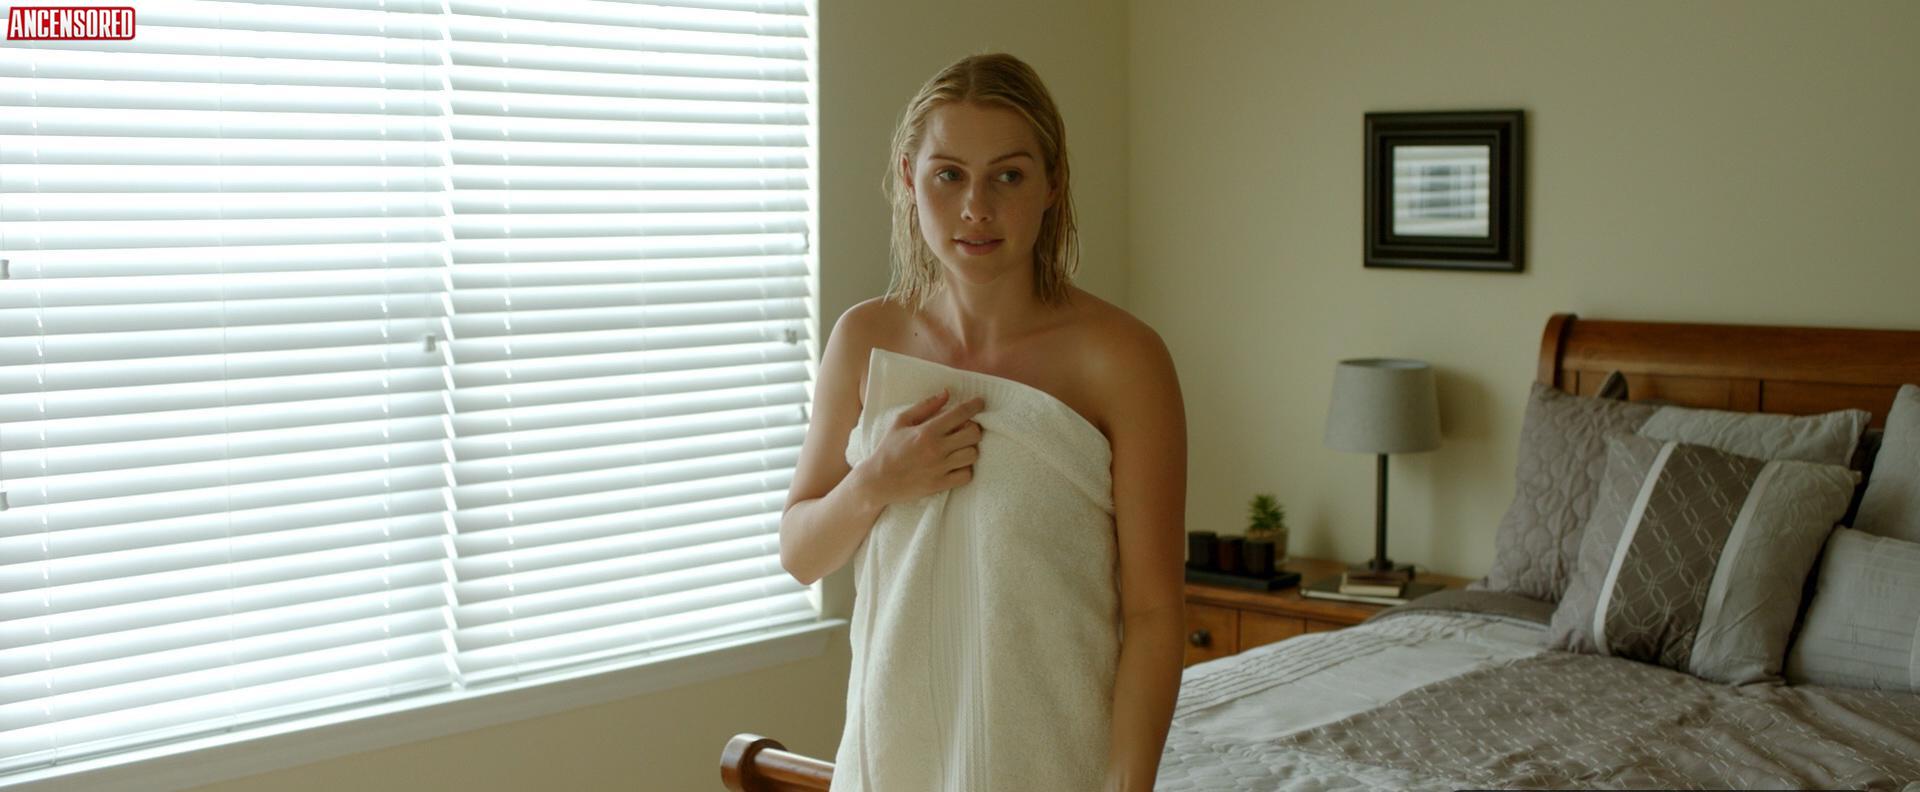 Claire holt nude pics